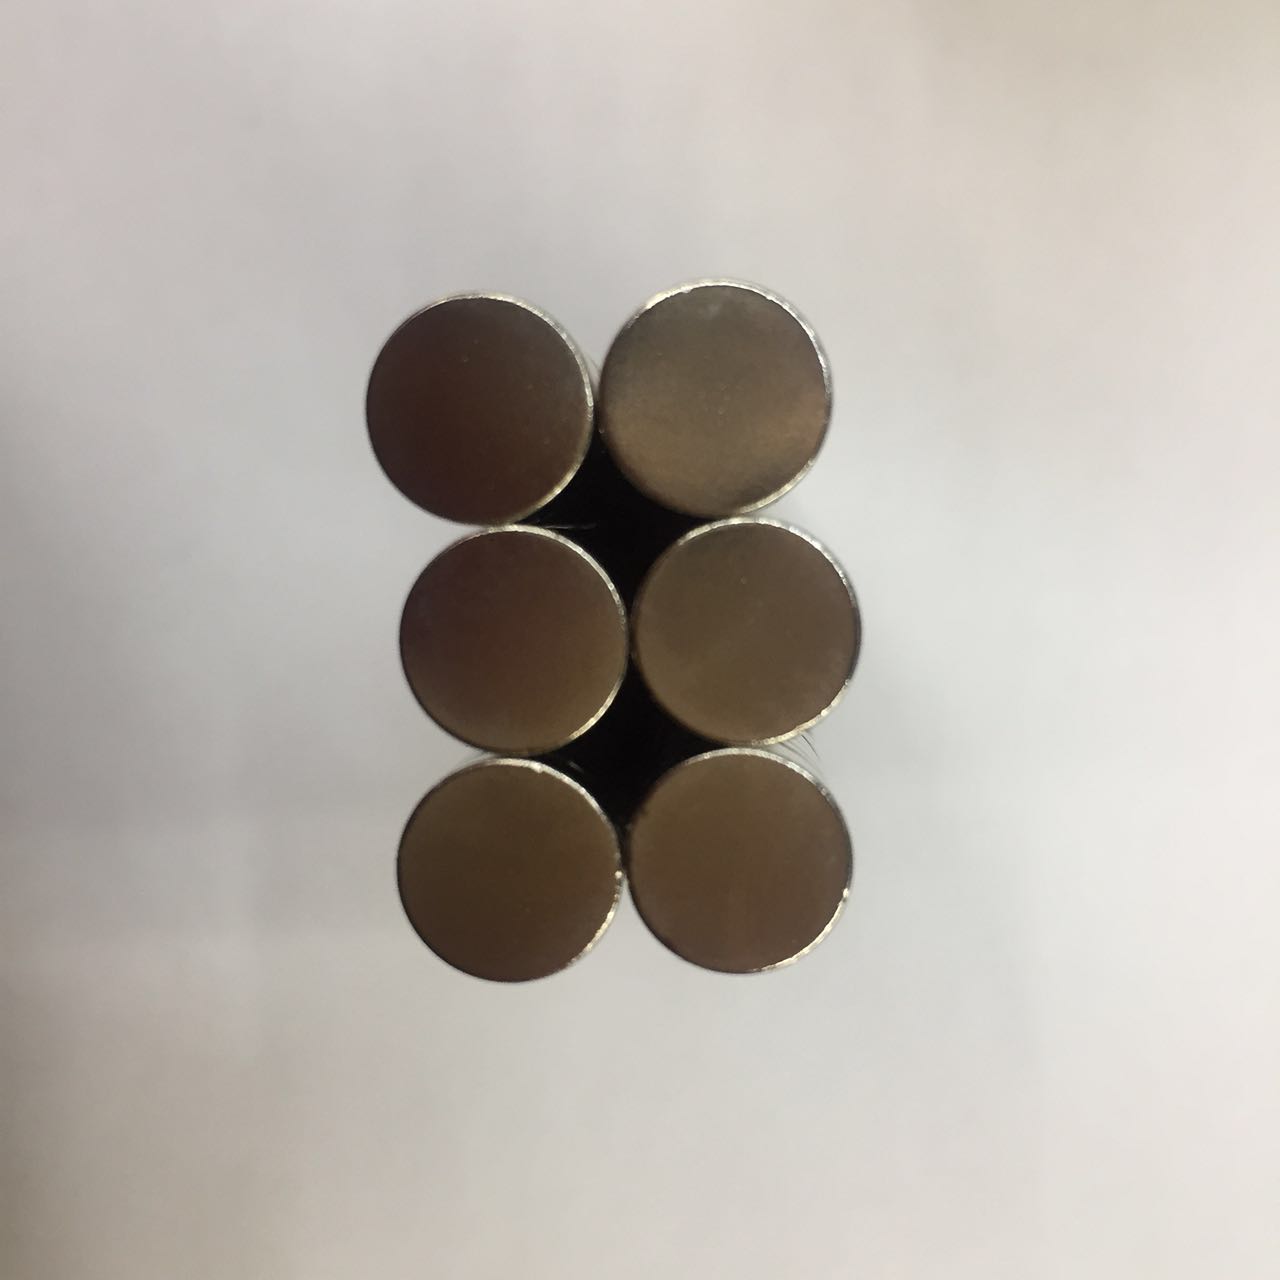 Manufacturers direct sales of 10*3MM nickel-plated magnet for nickel-plated magnet with nickel-plated magnet.